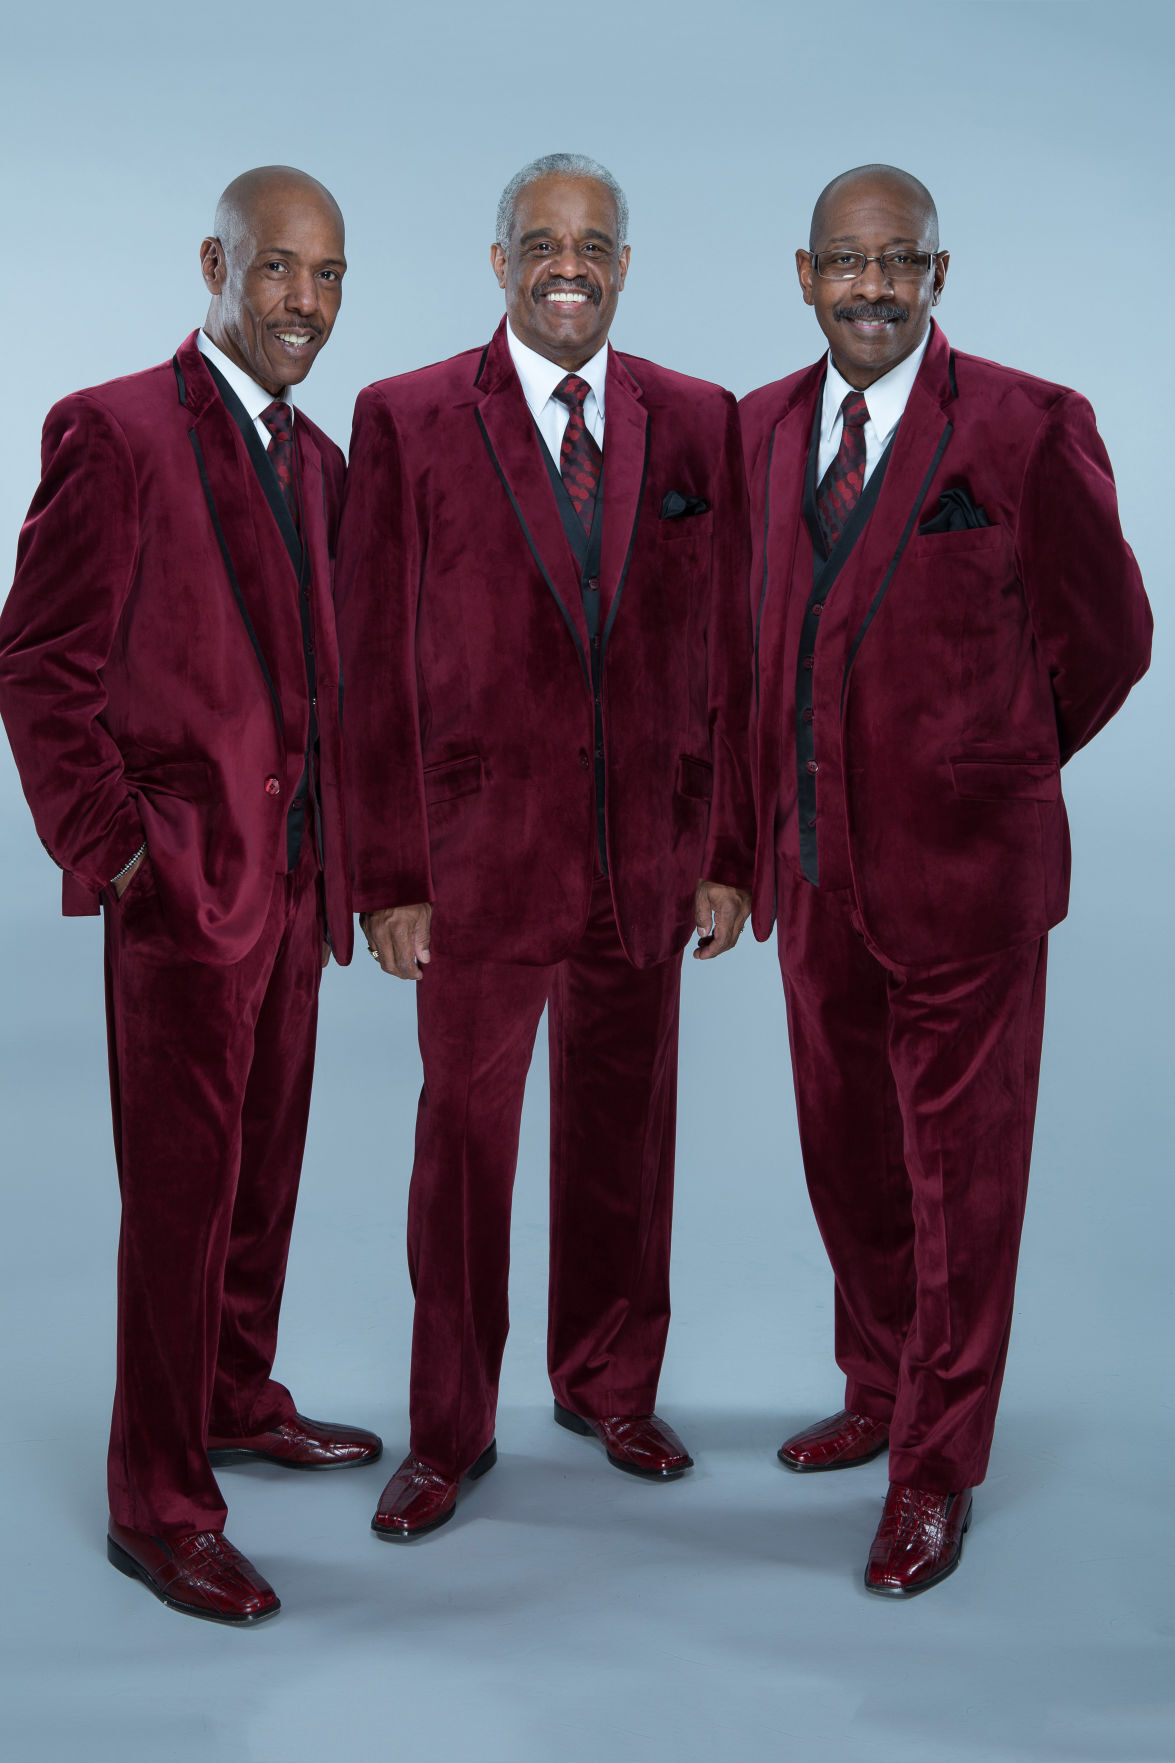 The Delfonics are a Philly group with international appeal